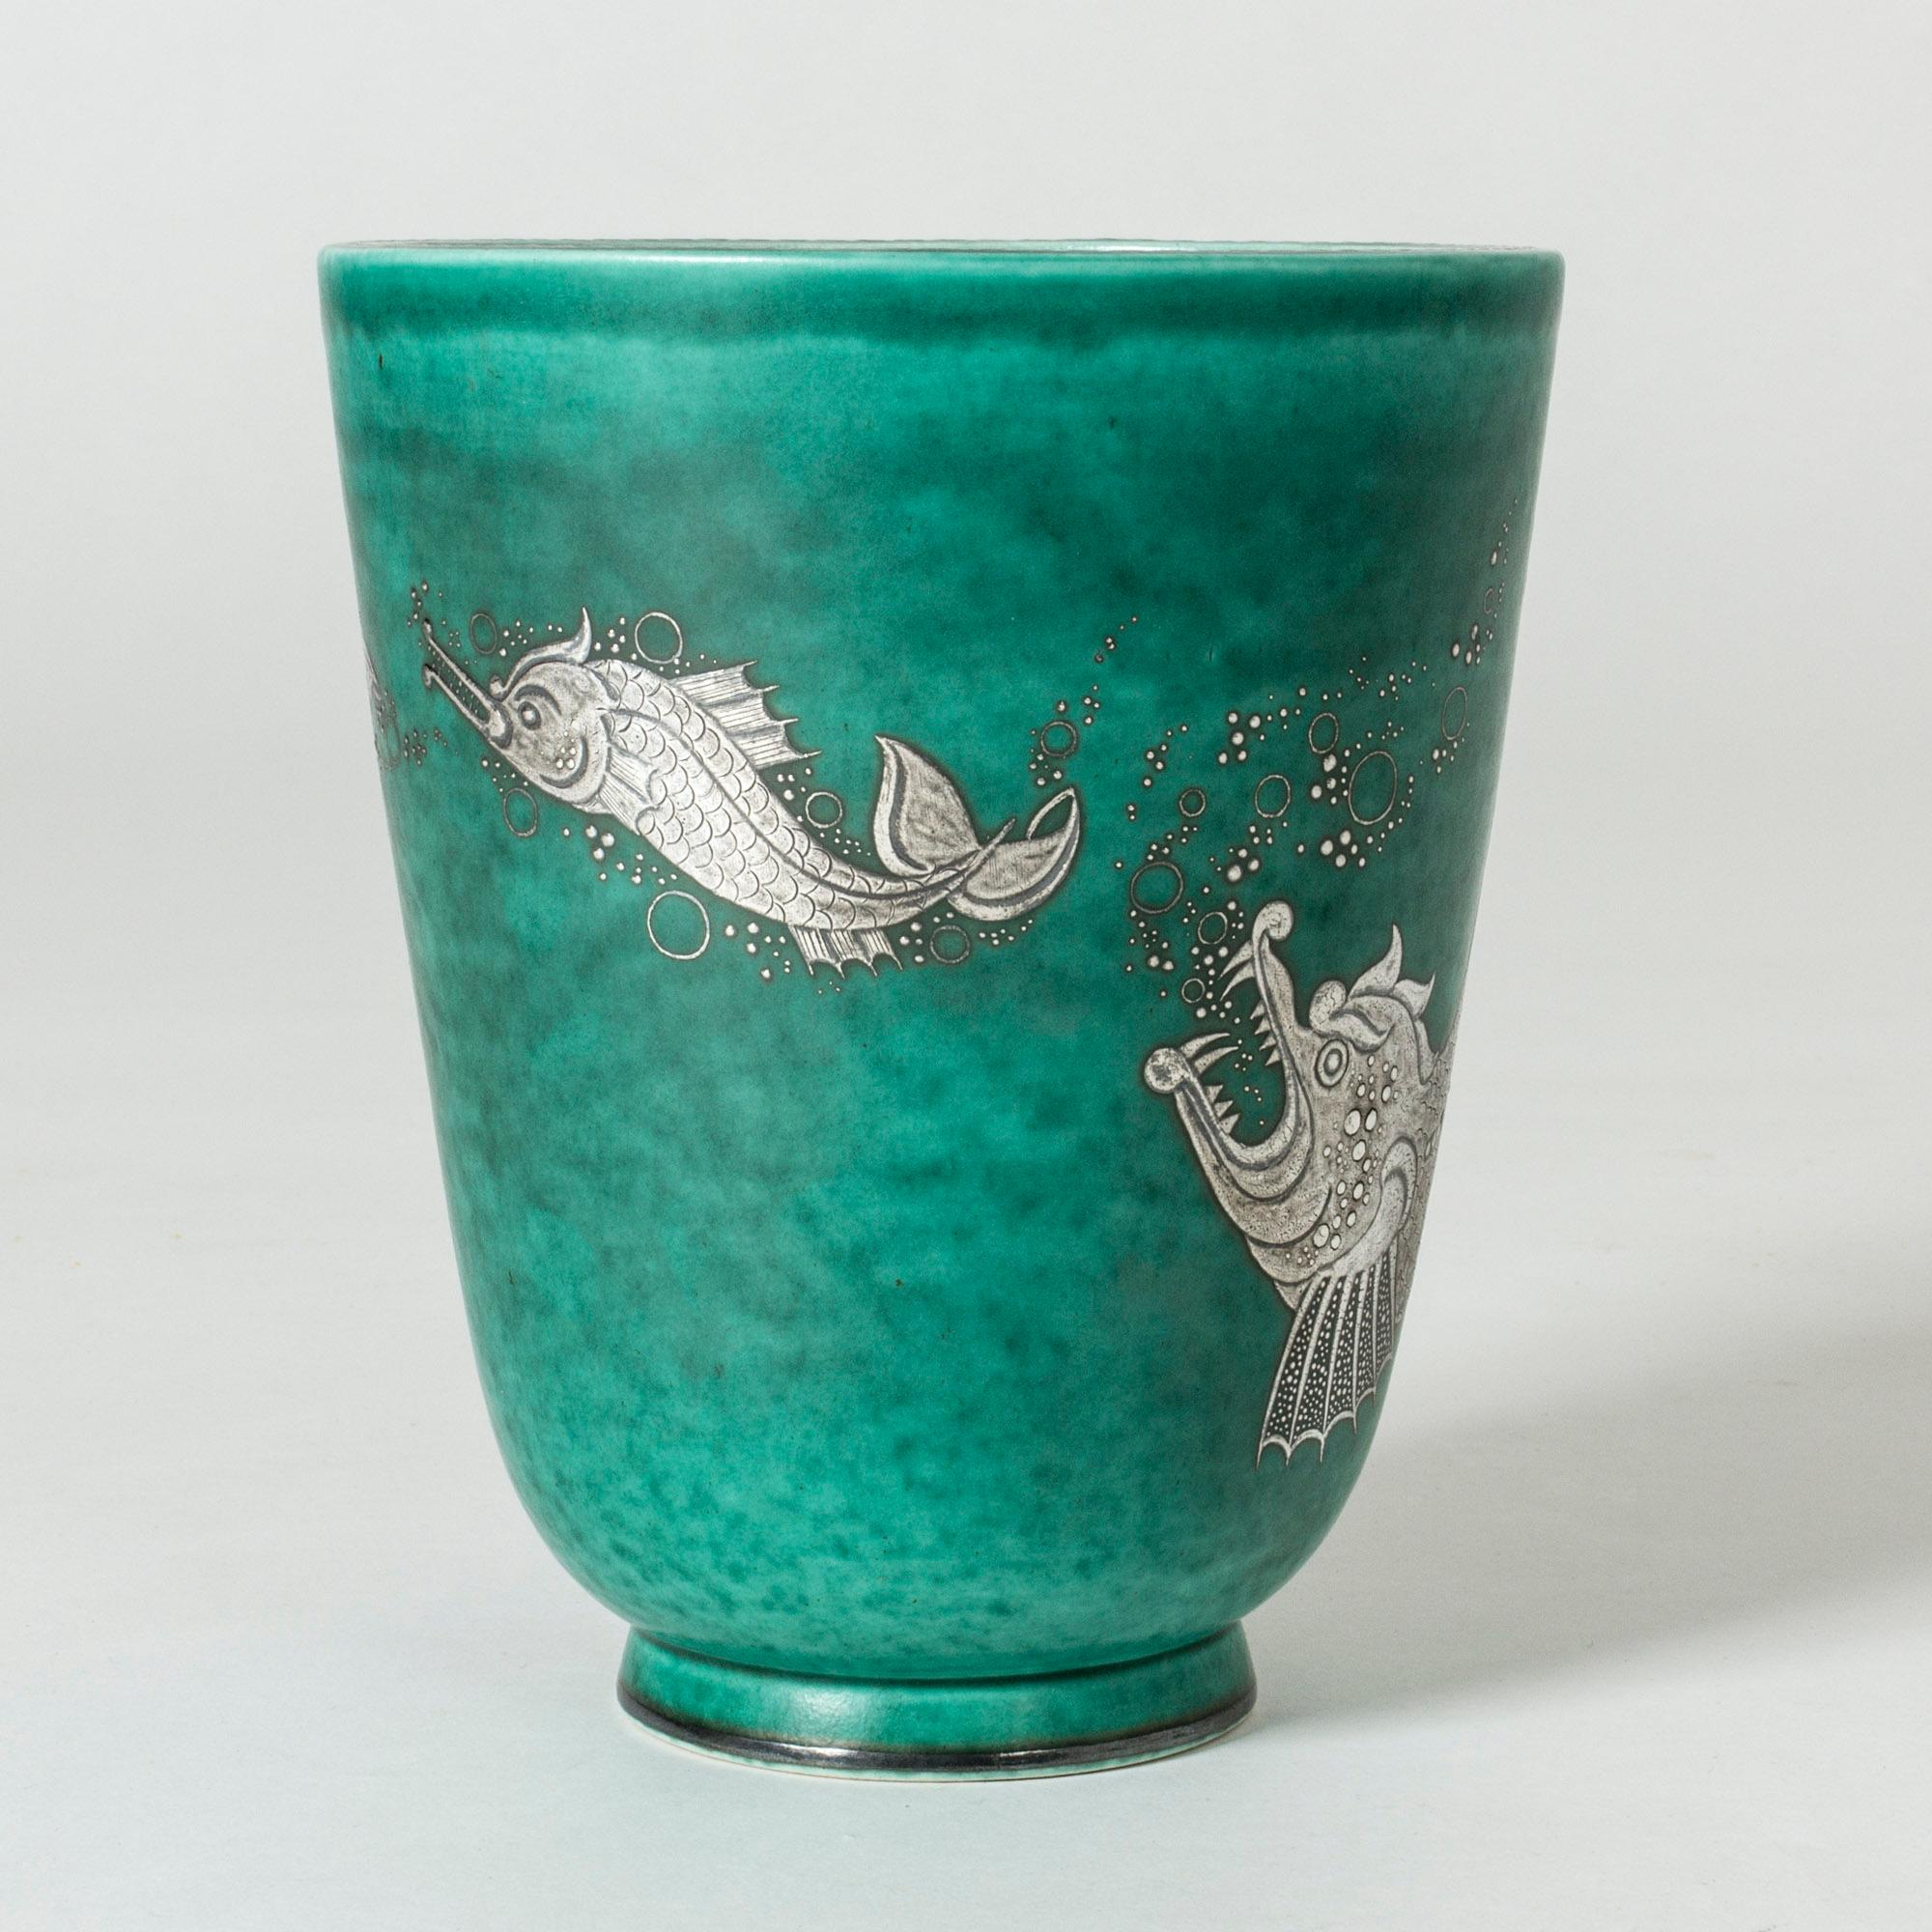 Stoneware “Argenta” vase by Wilhelm Kåge with an amazing silver decor of a big fish chasing a smaller fish, chasing a smaller fish. Lovely attention to every detail, scales and bubbles.
“Argenta” was introduced at the Stockholm exhibition in 1930